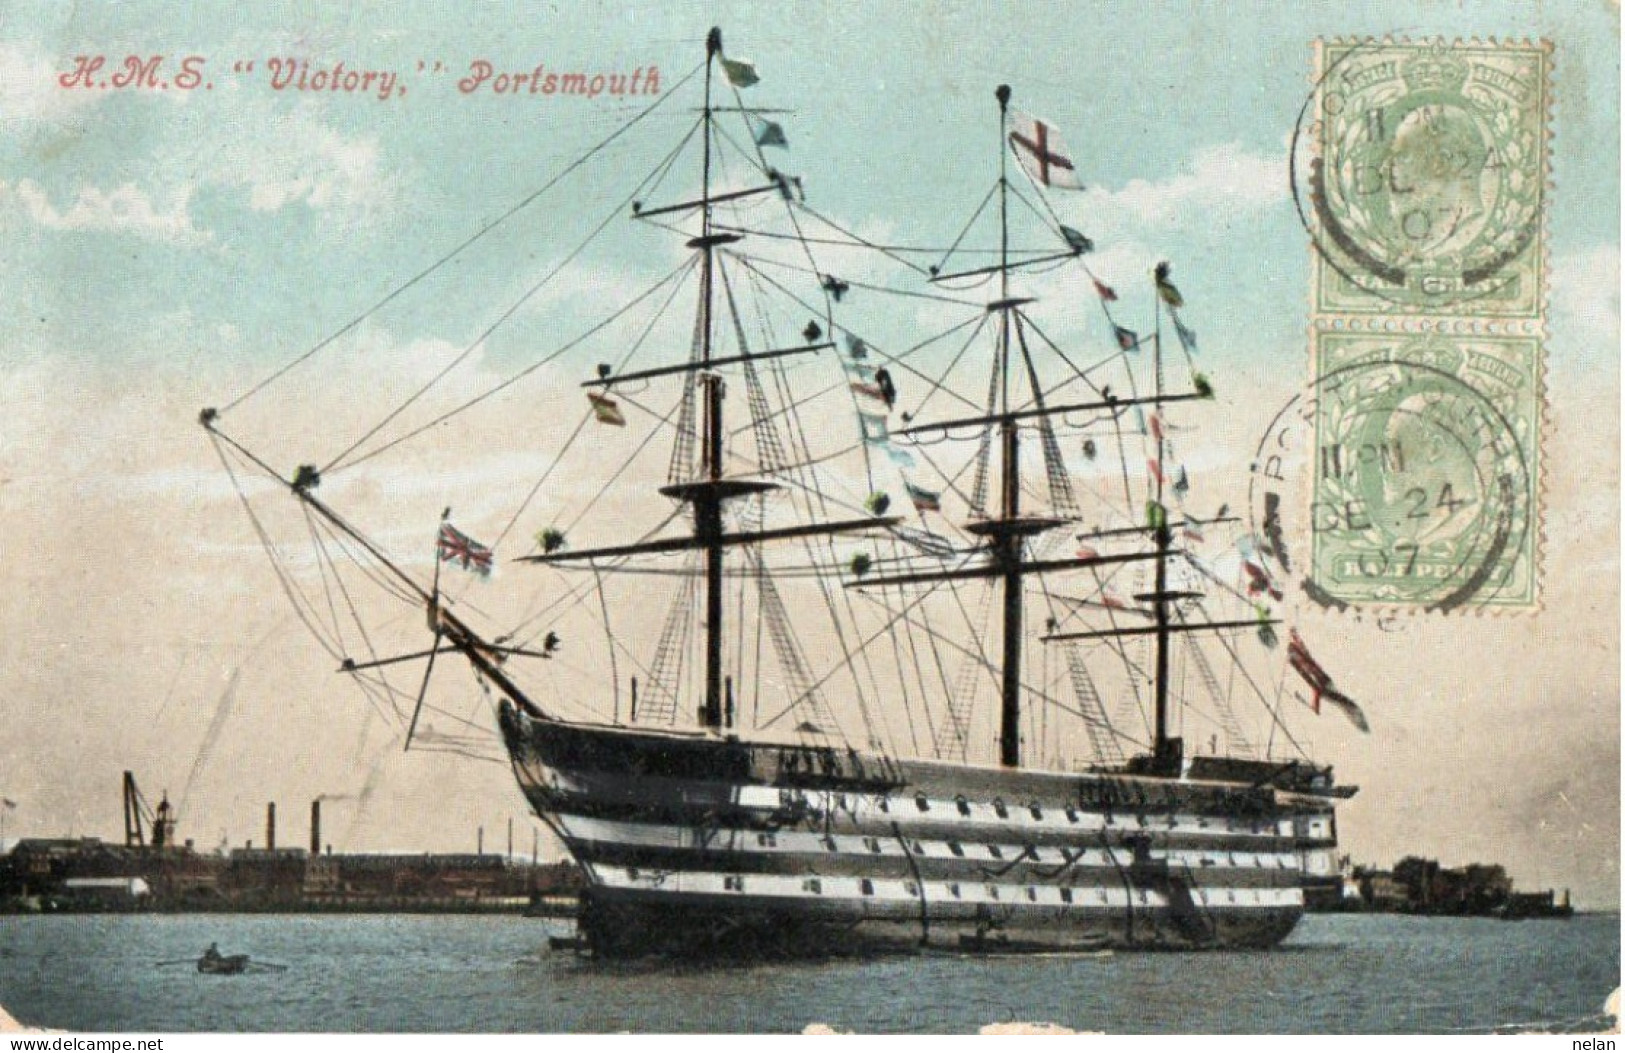 H. M. S. VICTORY PORTSMOUTH - Portsmouth